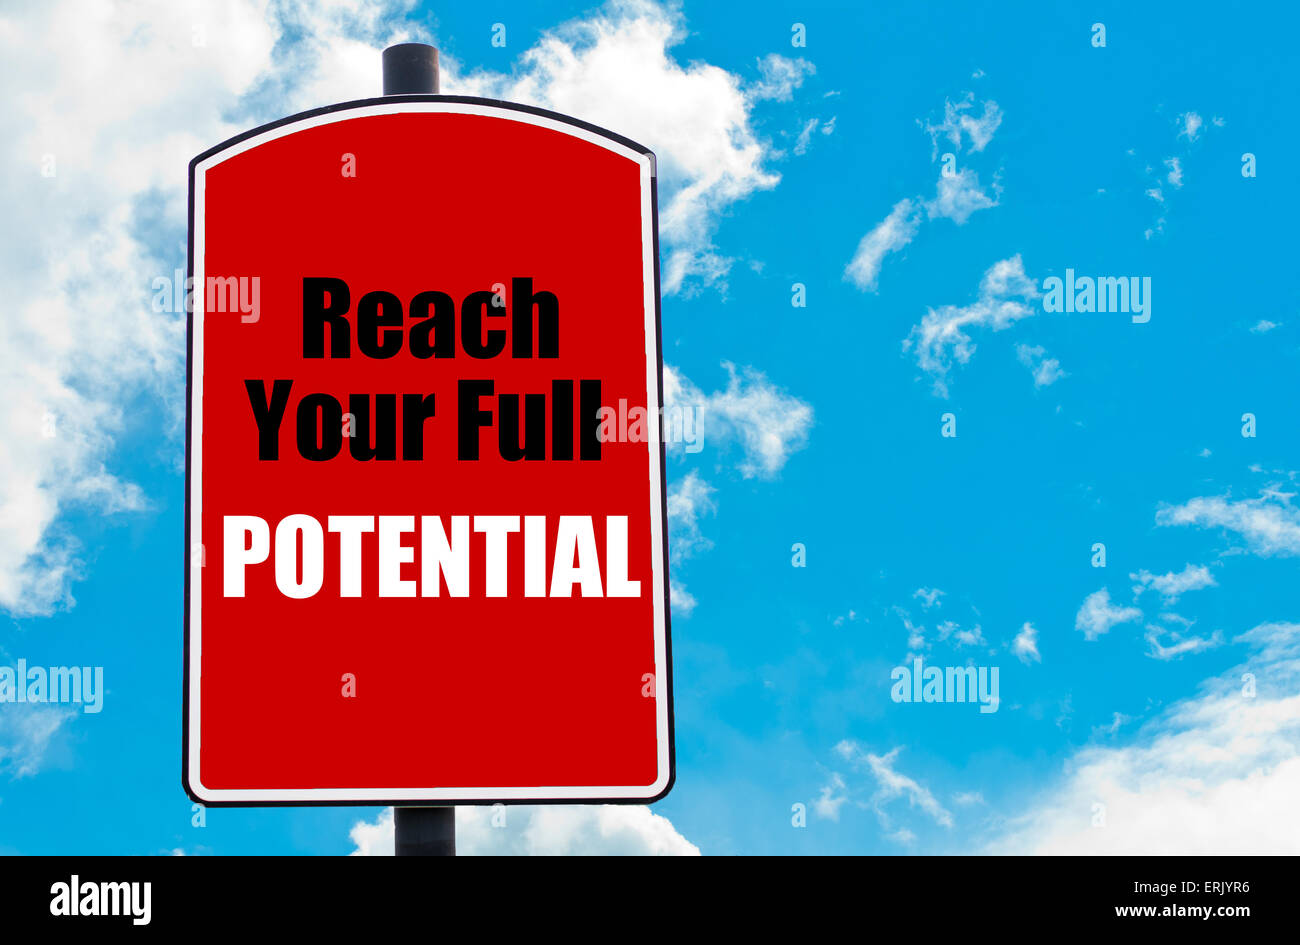 Reach Your Full Potential motivational quote written on red road sign isolated over clear blue sky background. Stock Photo